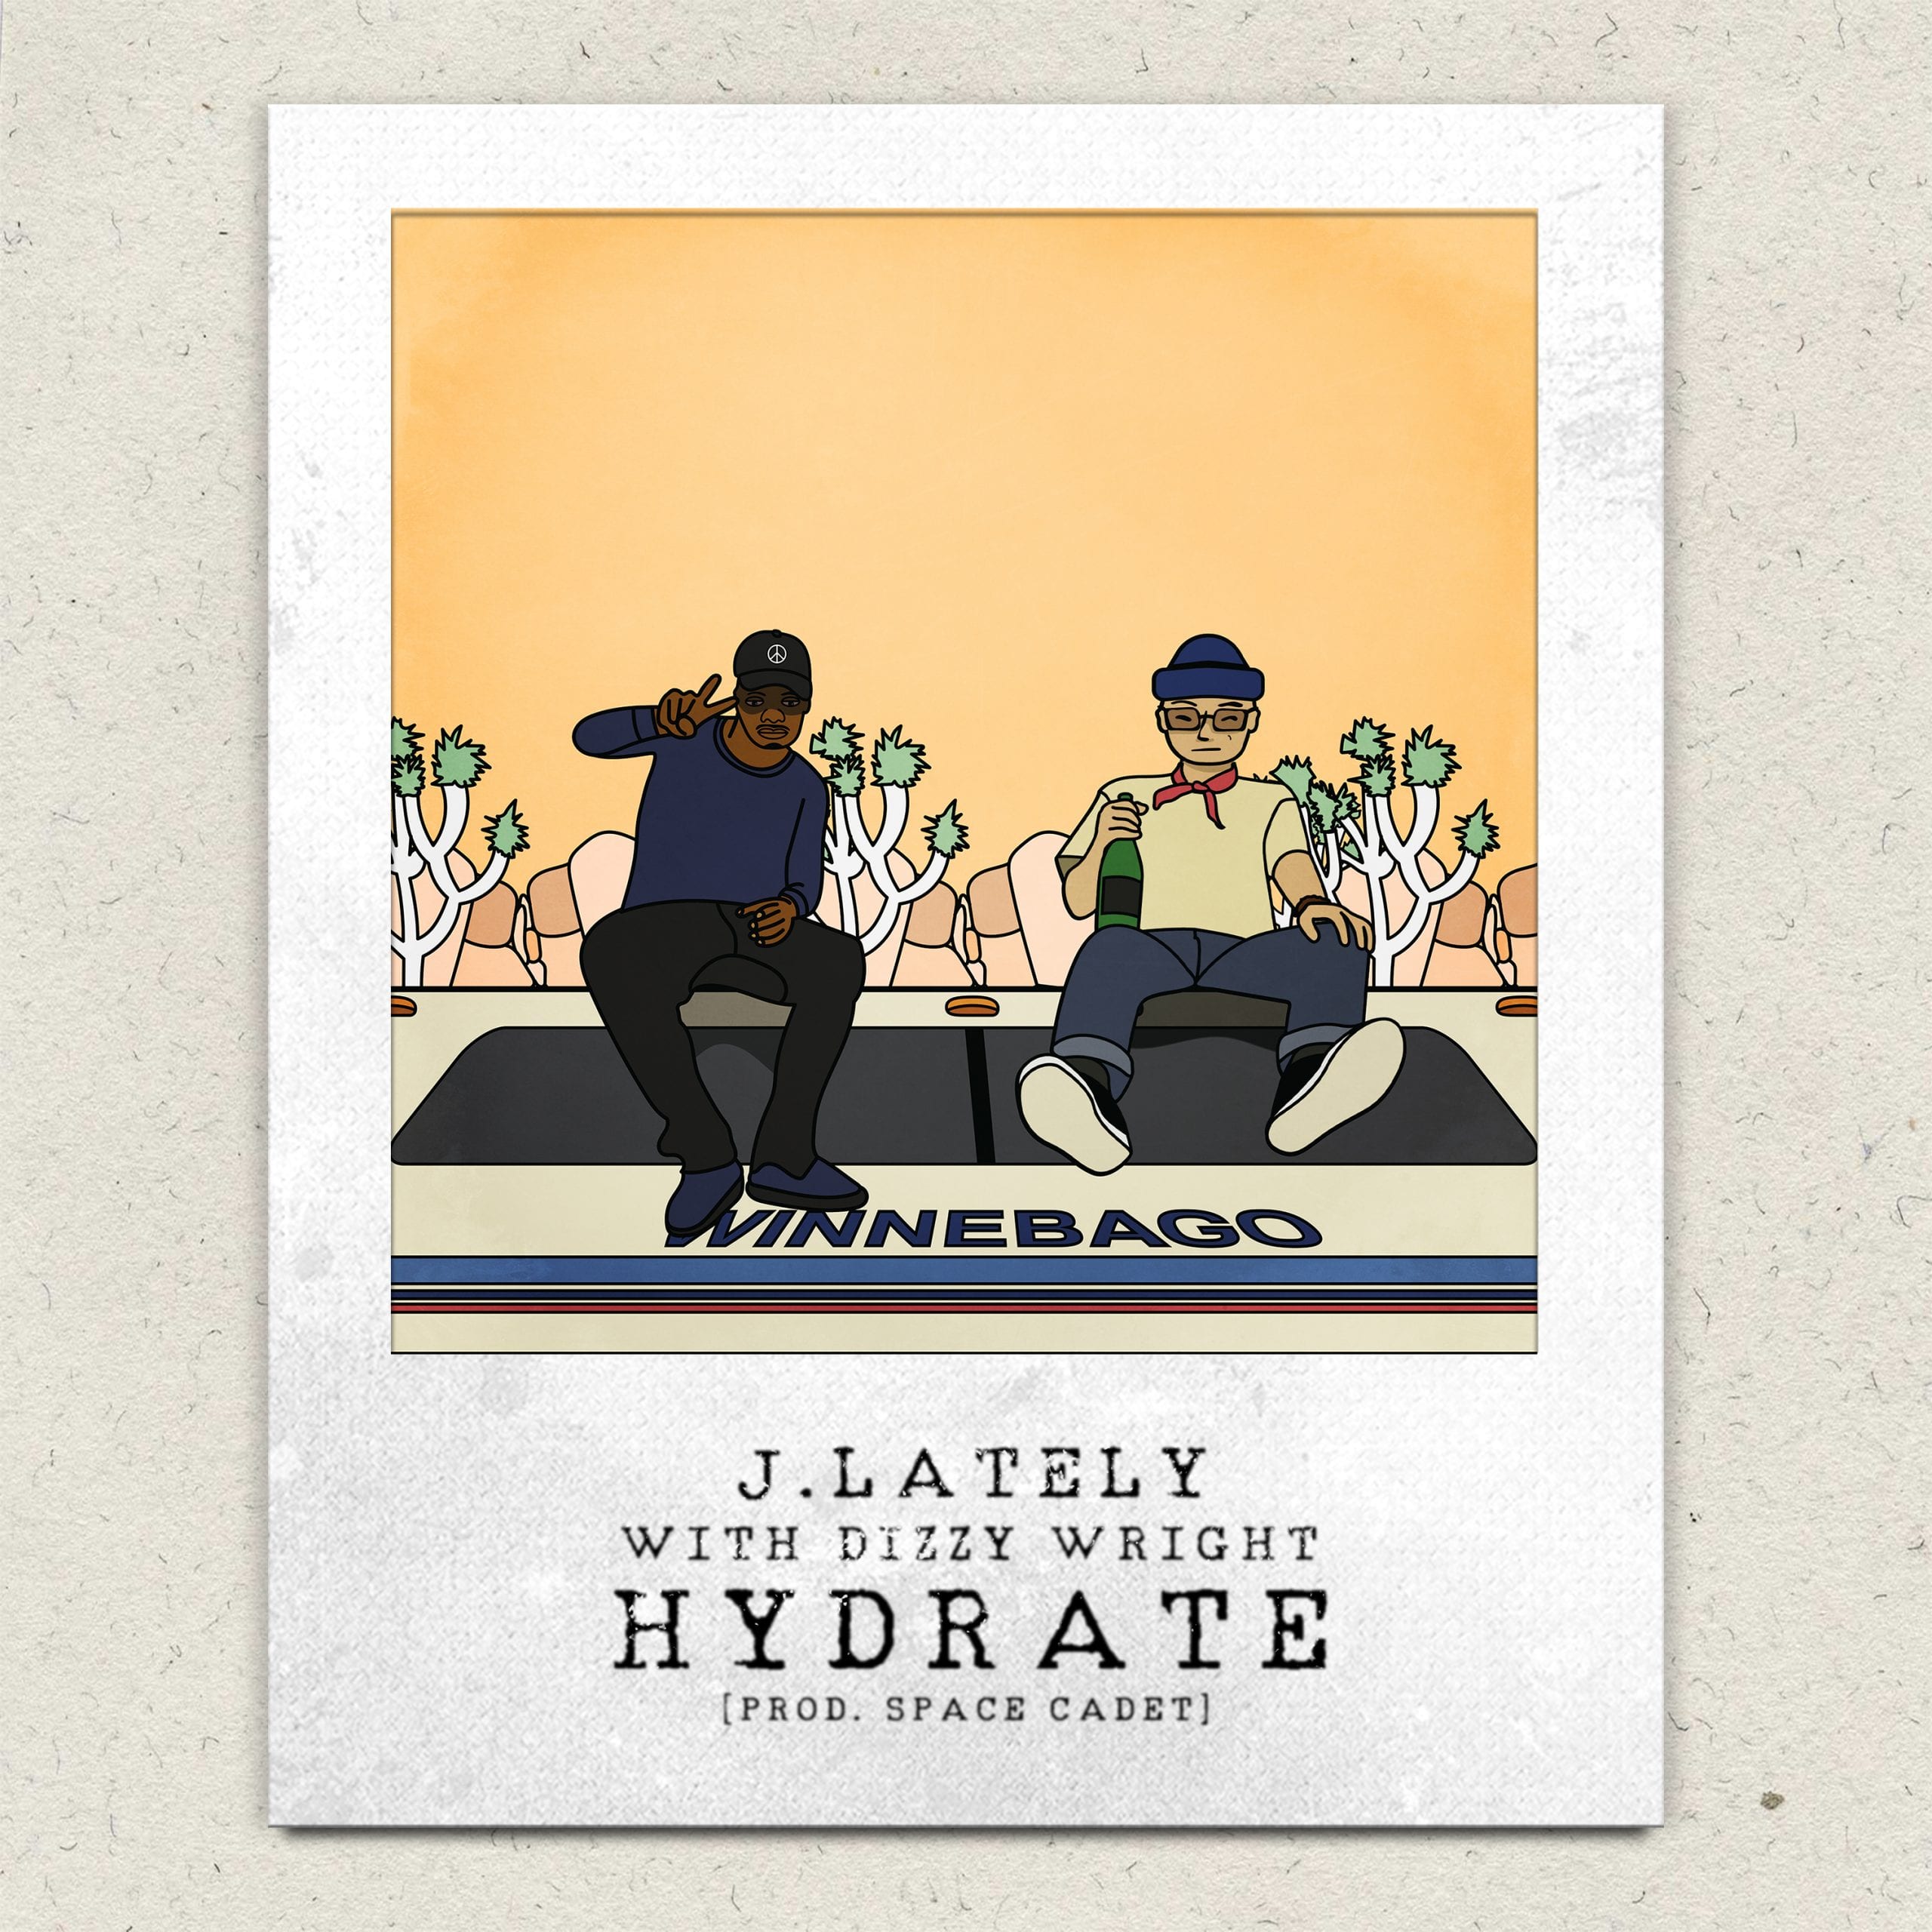 J.Lately - Hydrate (cover art)